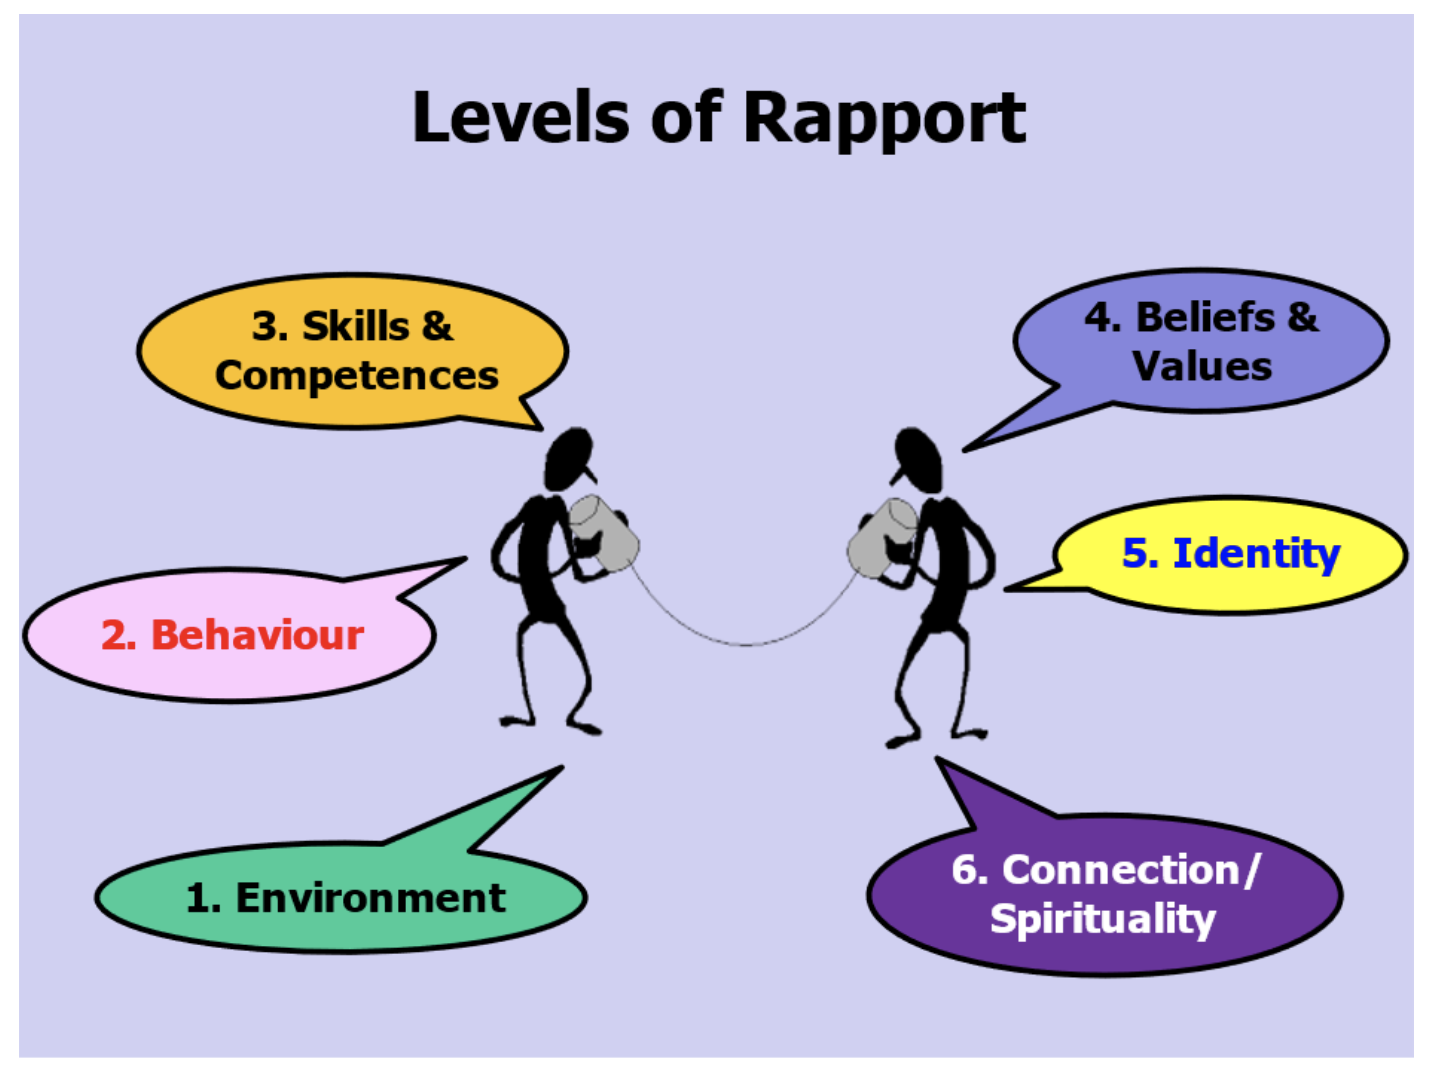 Levels of Rapport